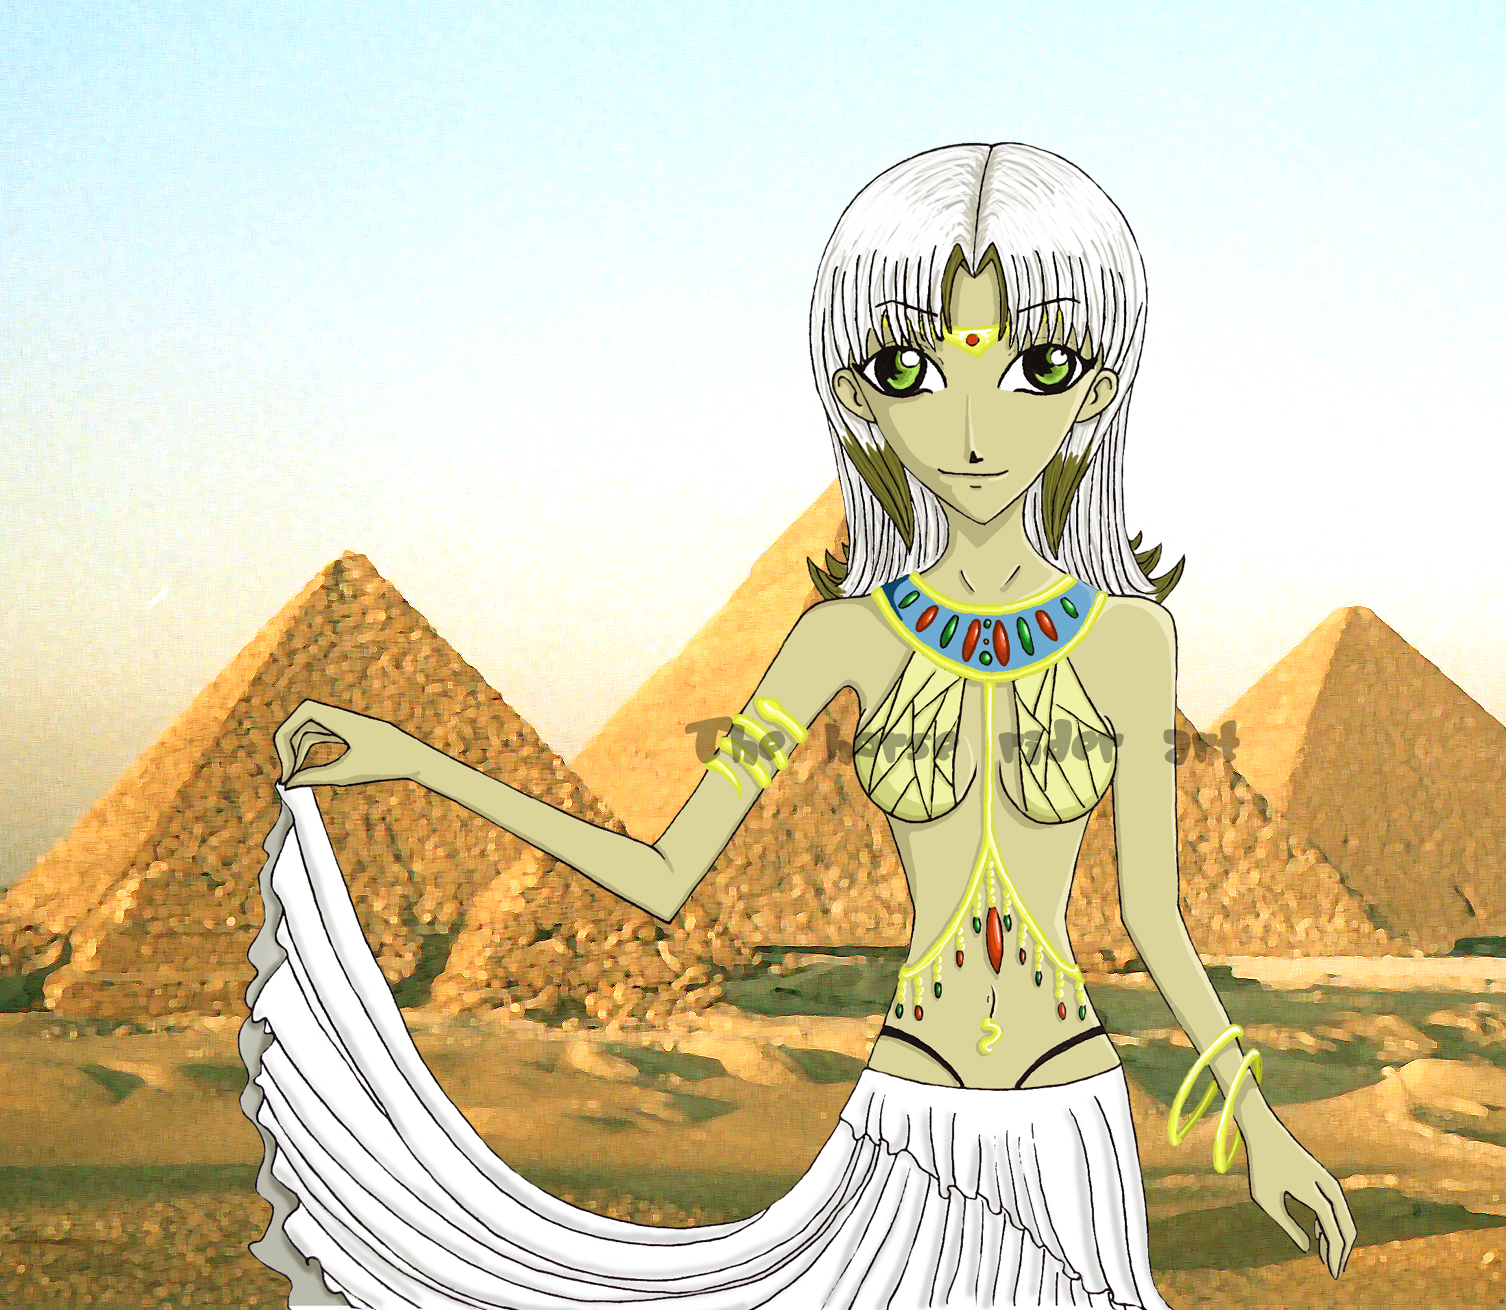 Egypt princess by The_horse_rider